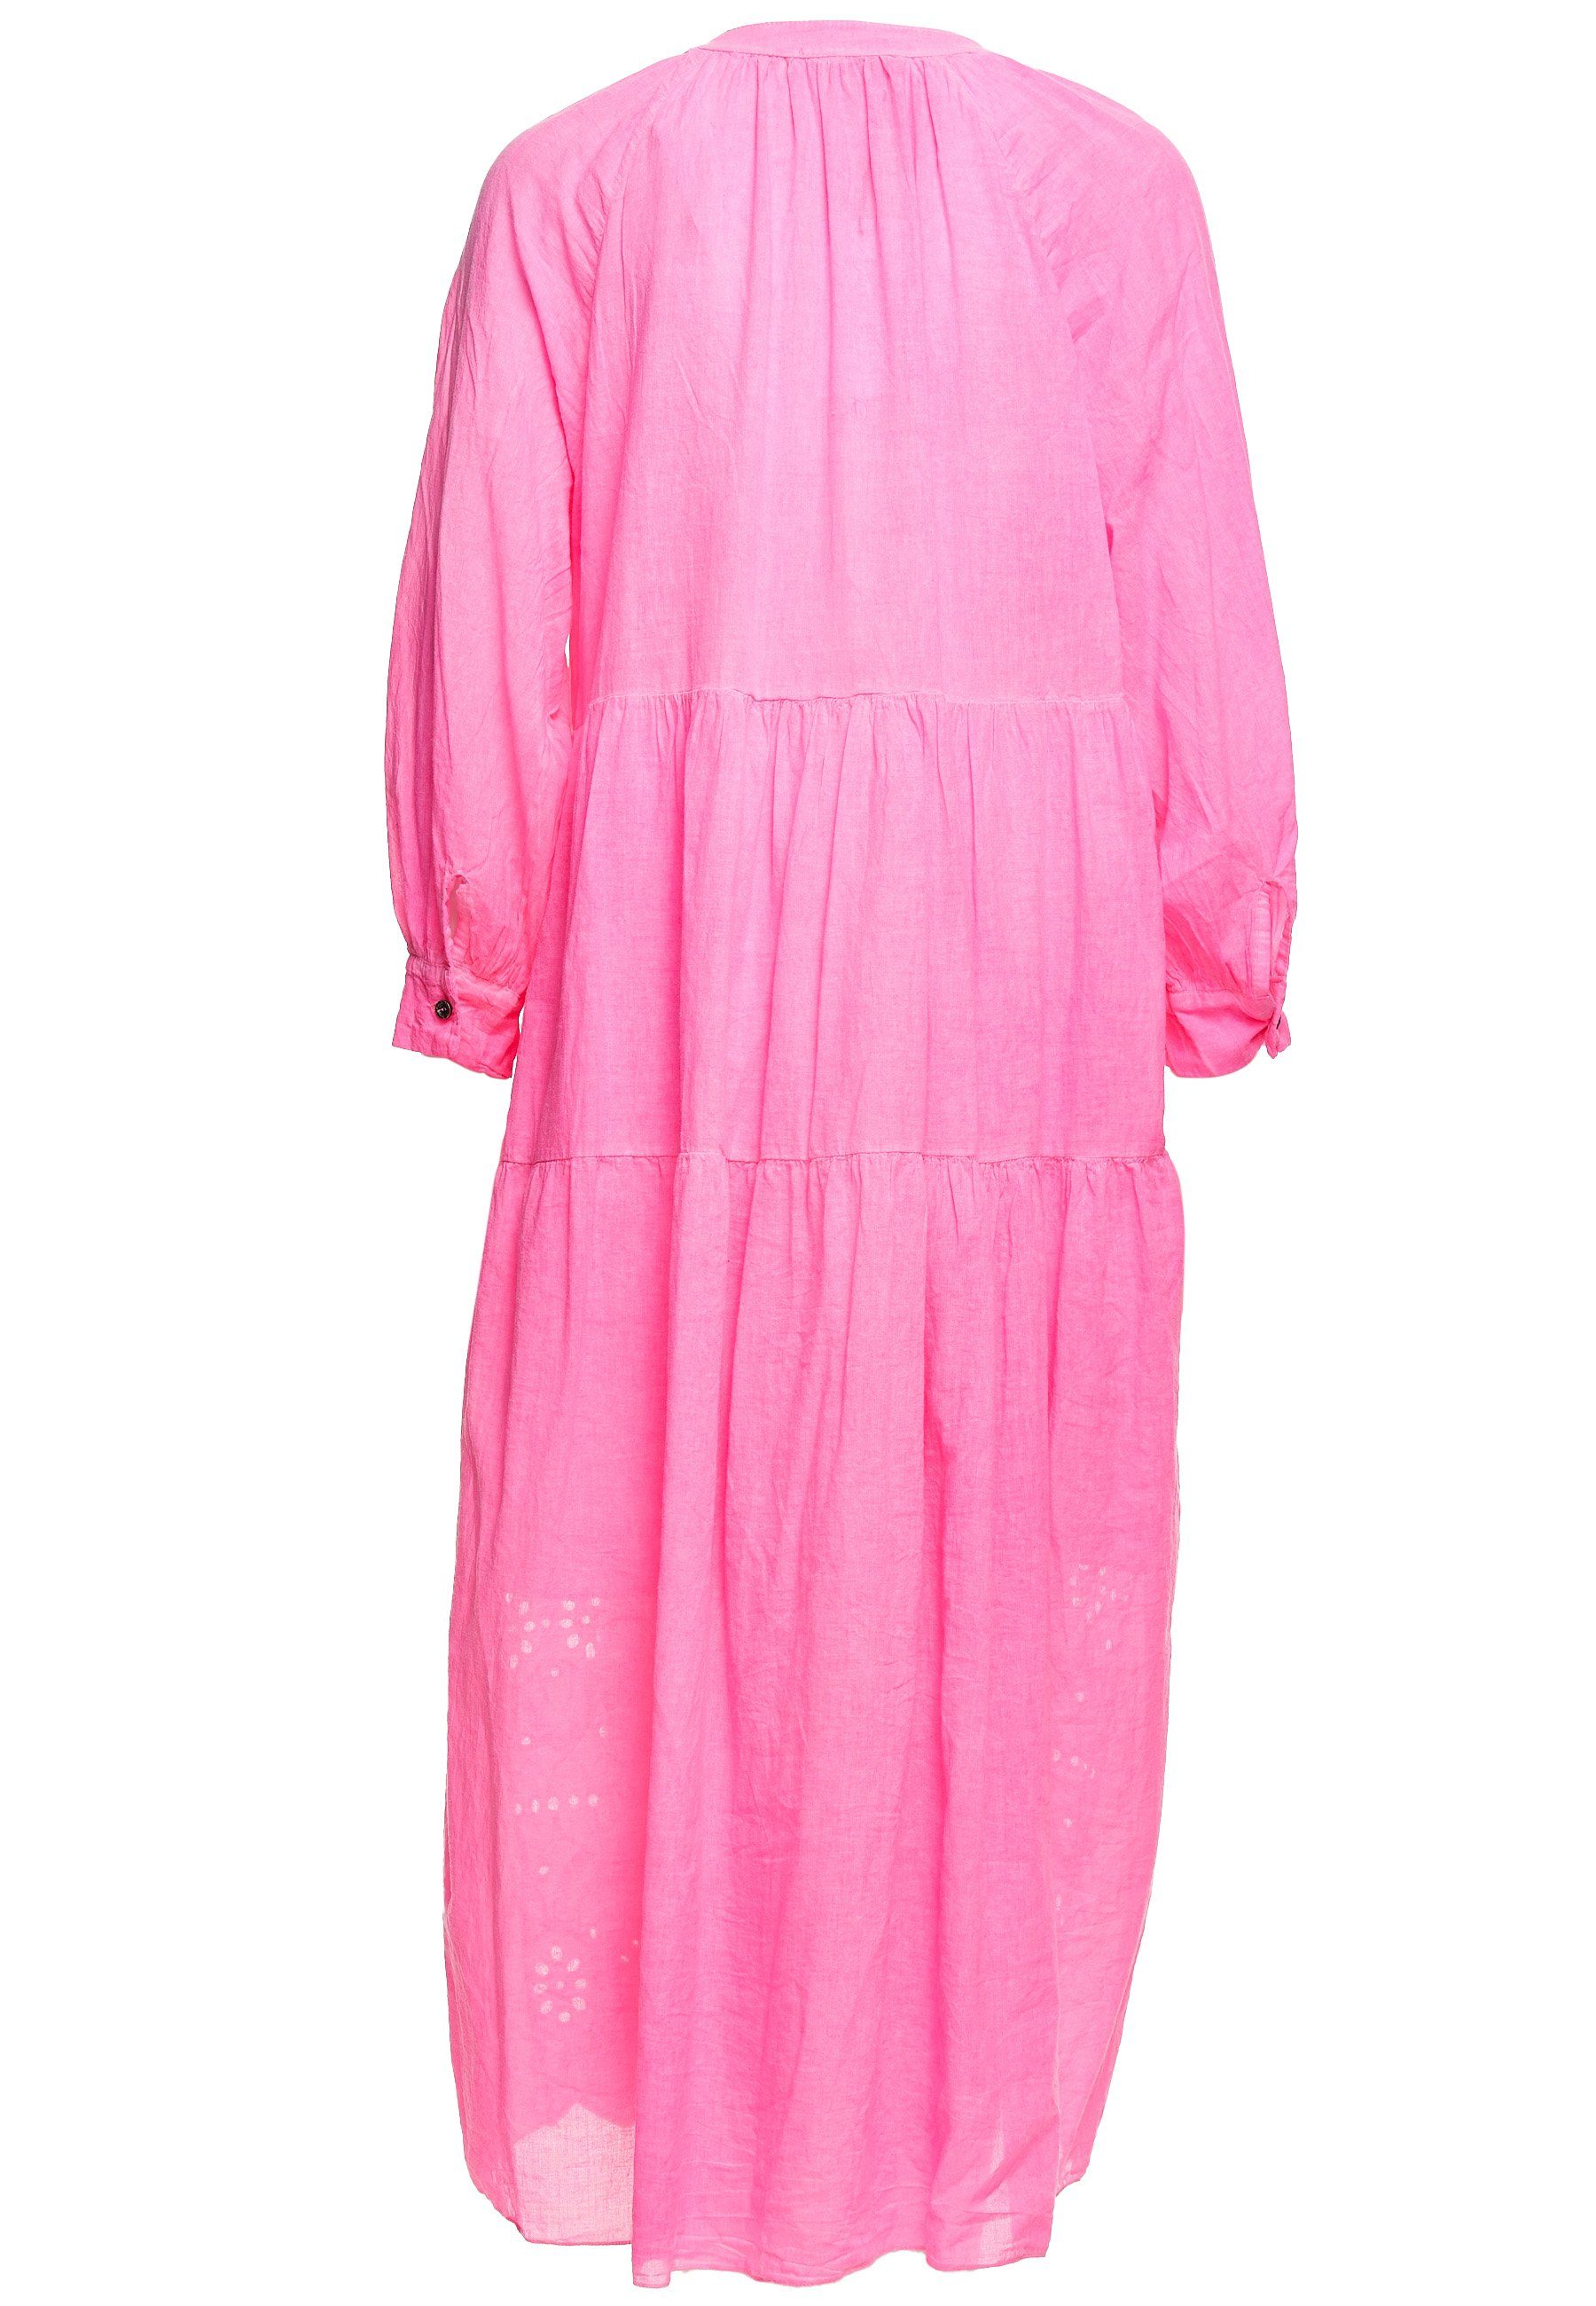 Decay Jerseykleid Design tollem rosa in